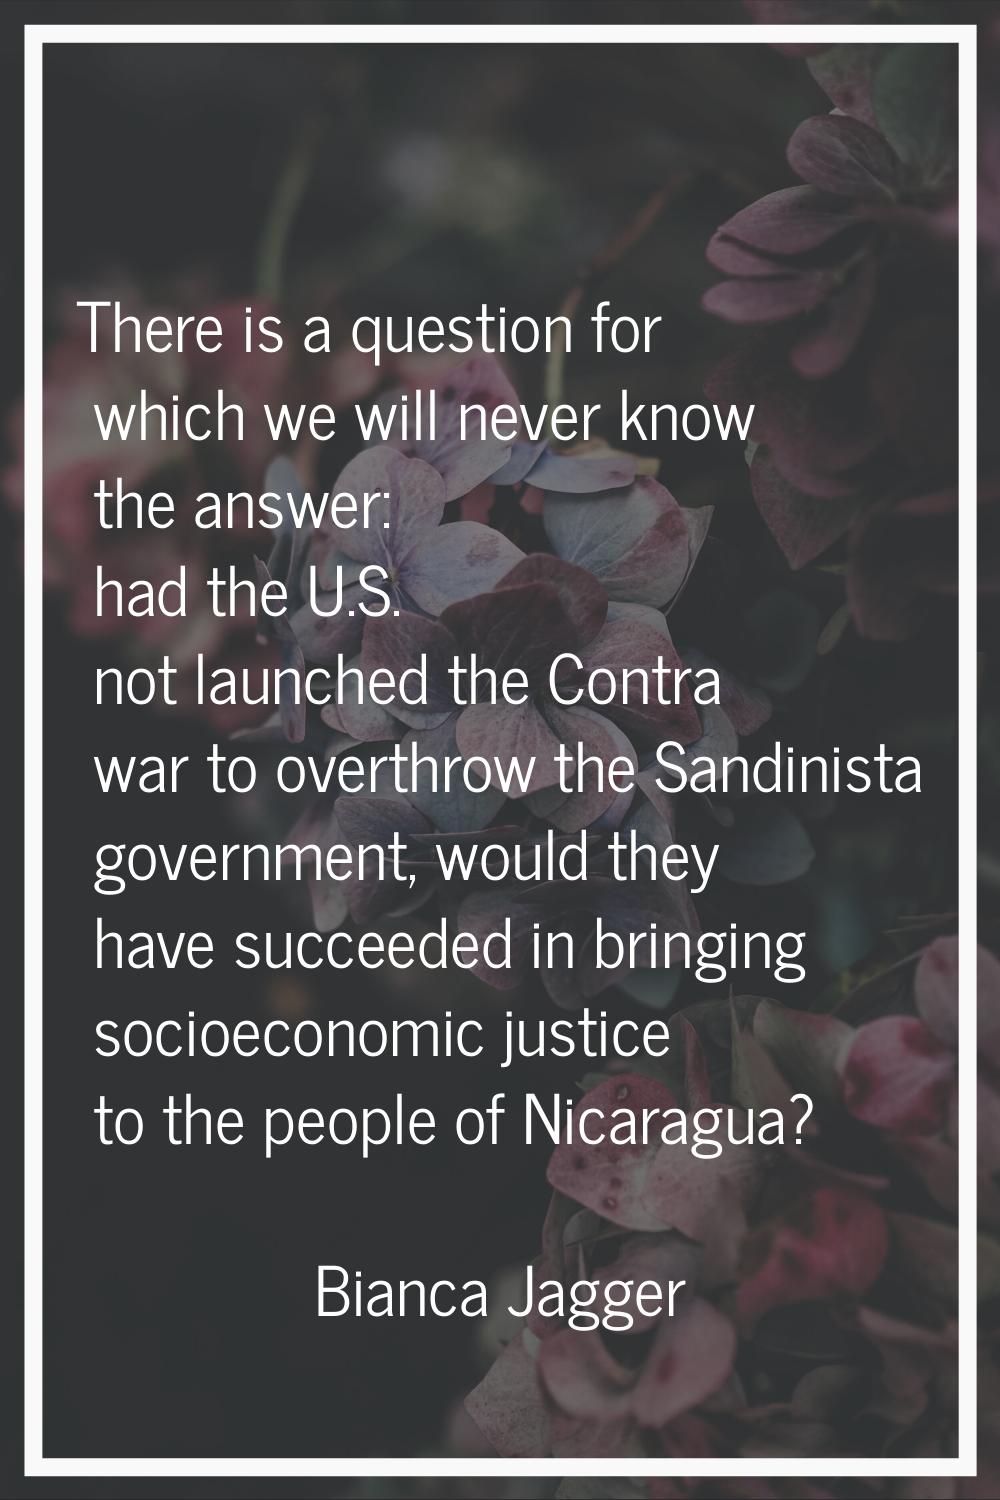 There is a question for which we will never know the answer: had the U.S. not launched the Contra w